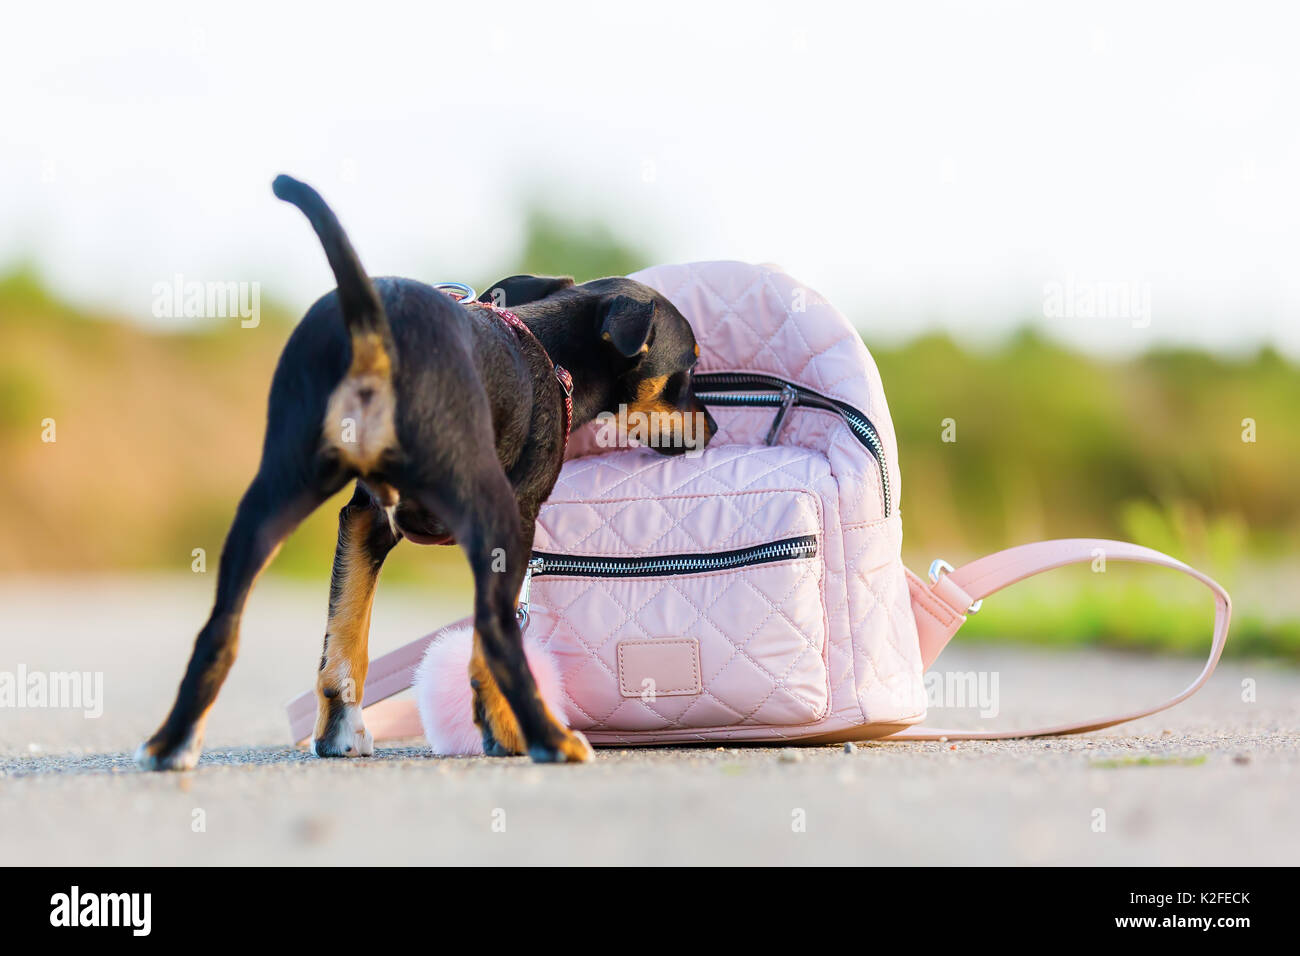 picture of a pinscher hybrid puppy who is looking at a woman's handbag Stock Photo